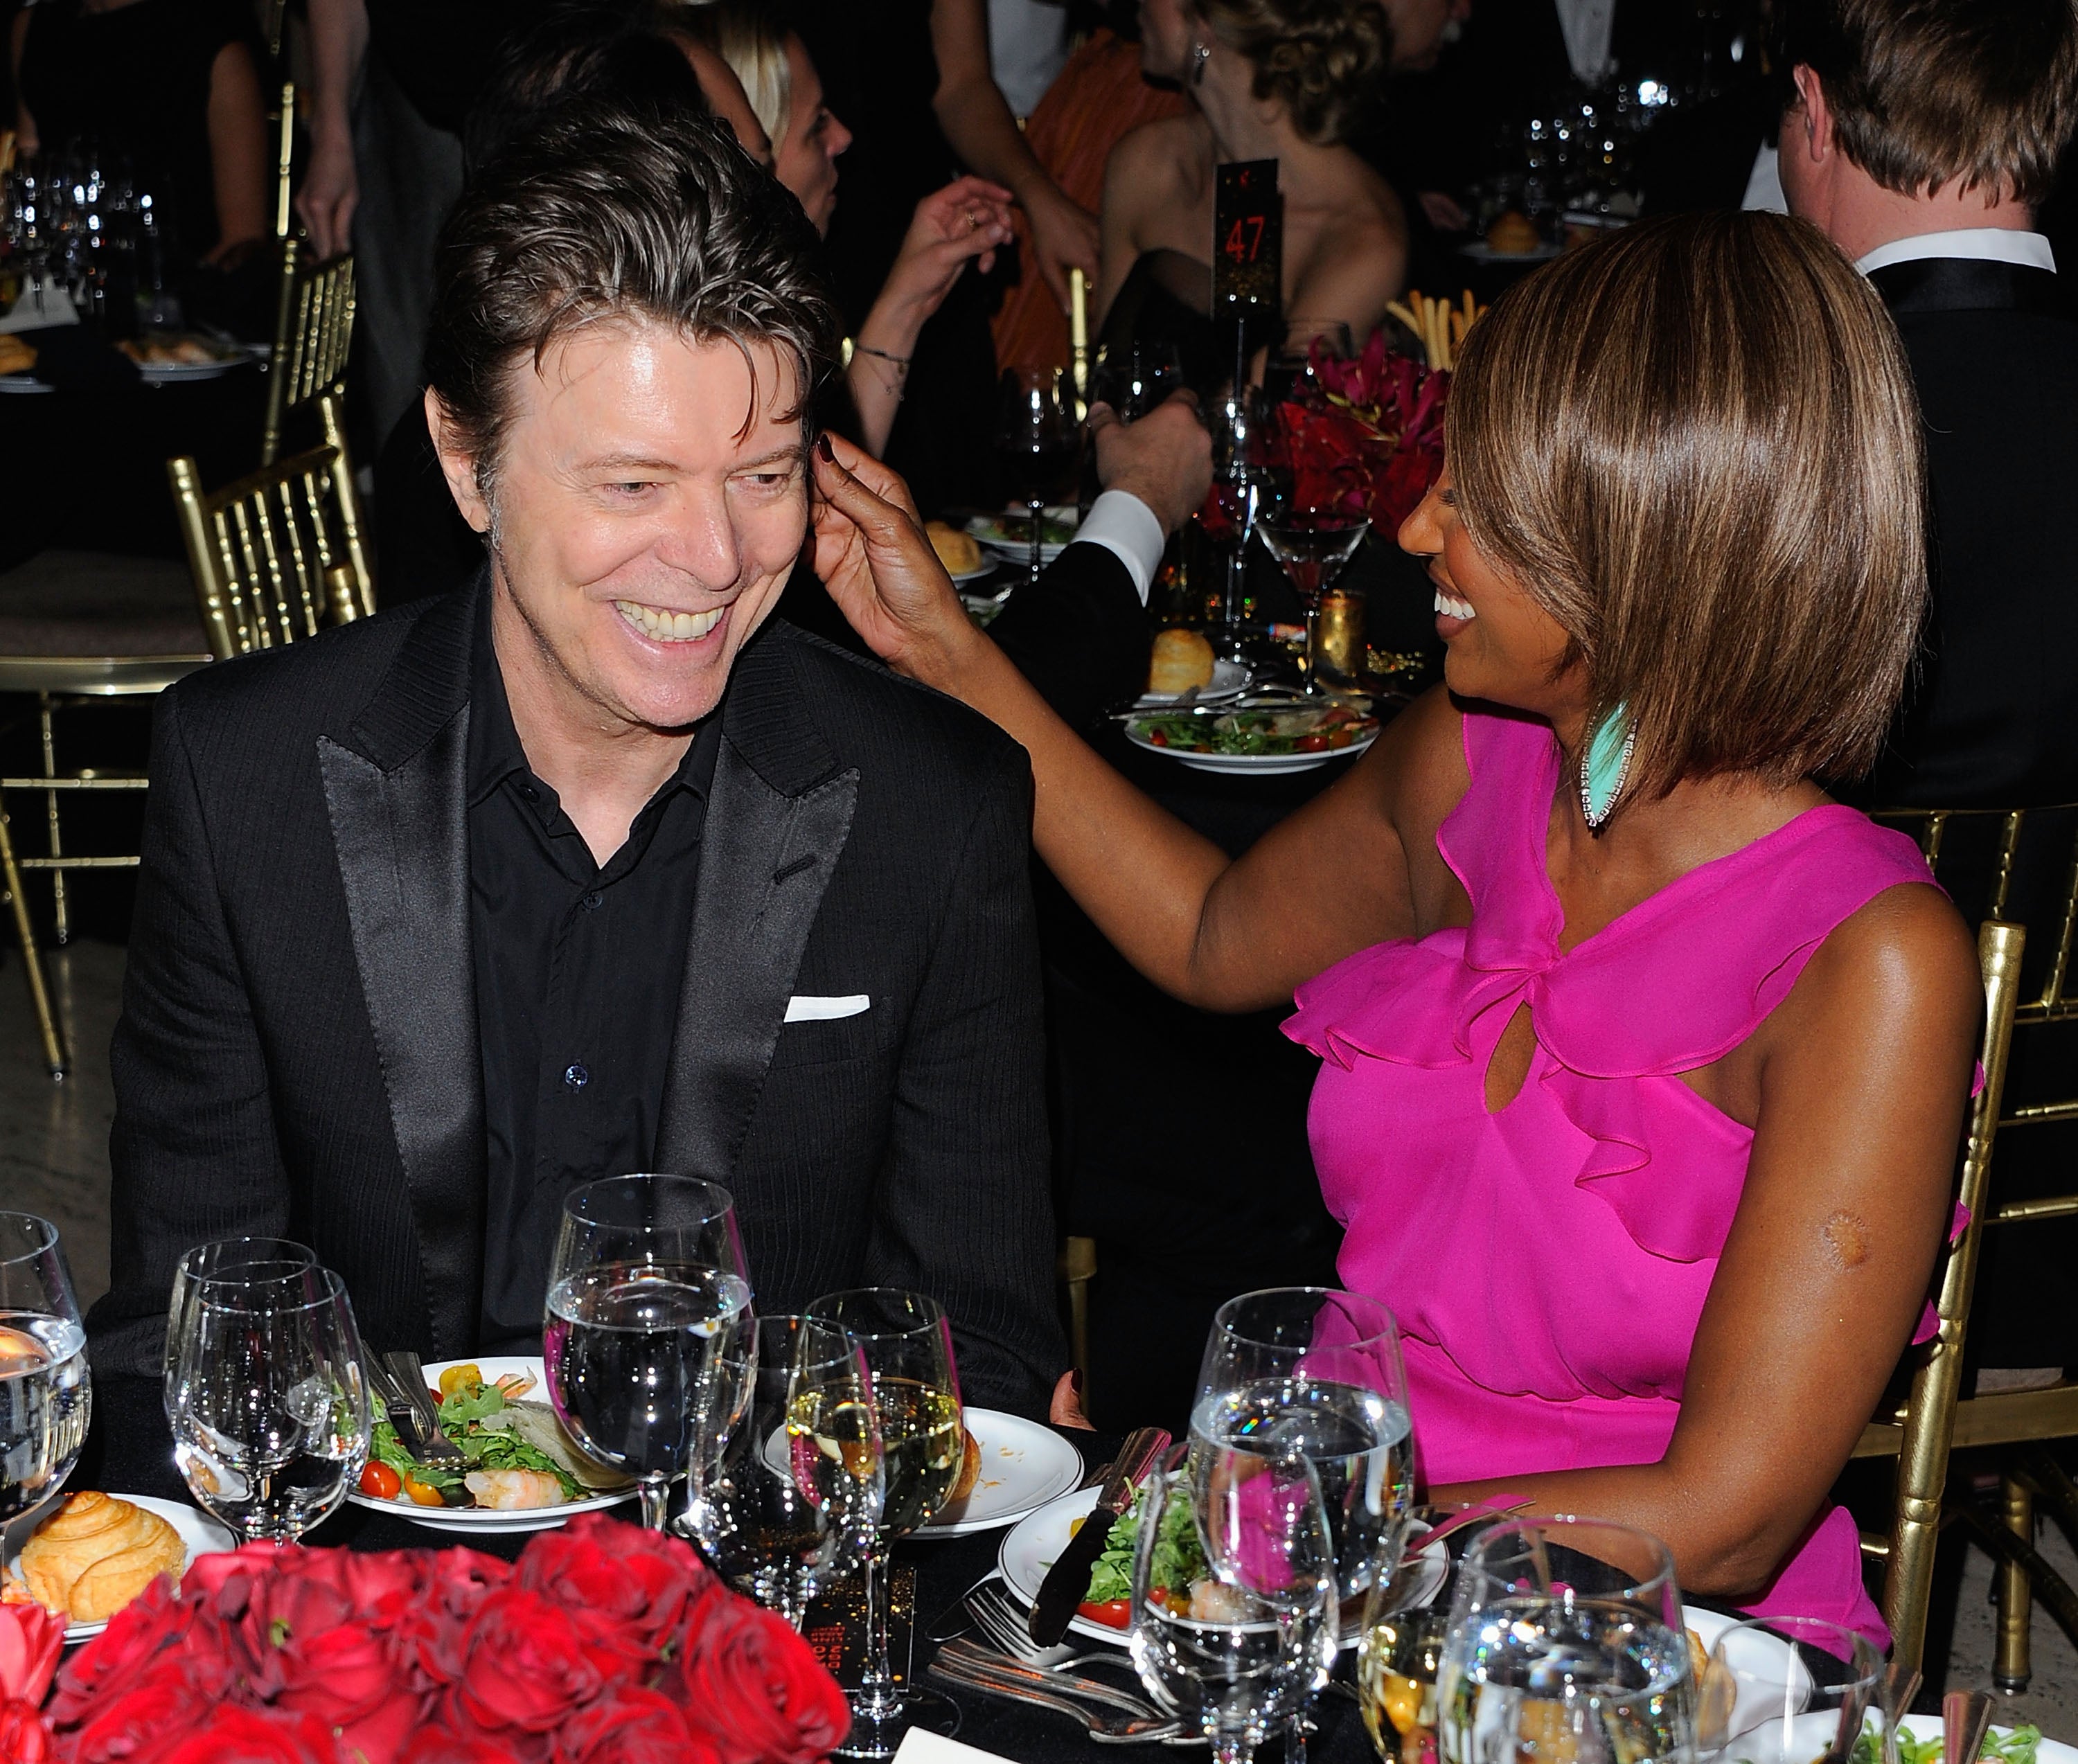 David Bowie and his wife Iman in New York in 2011